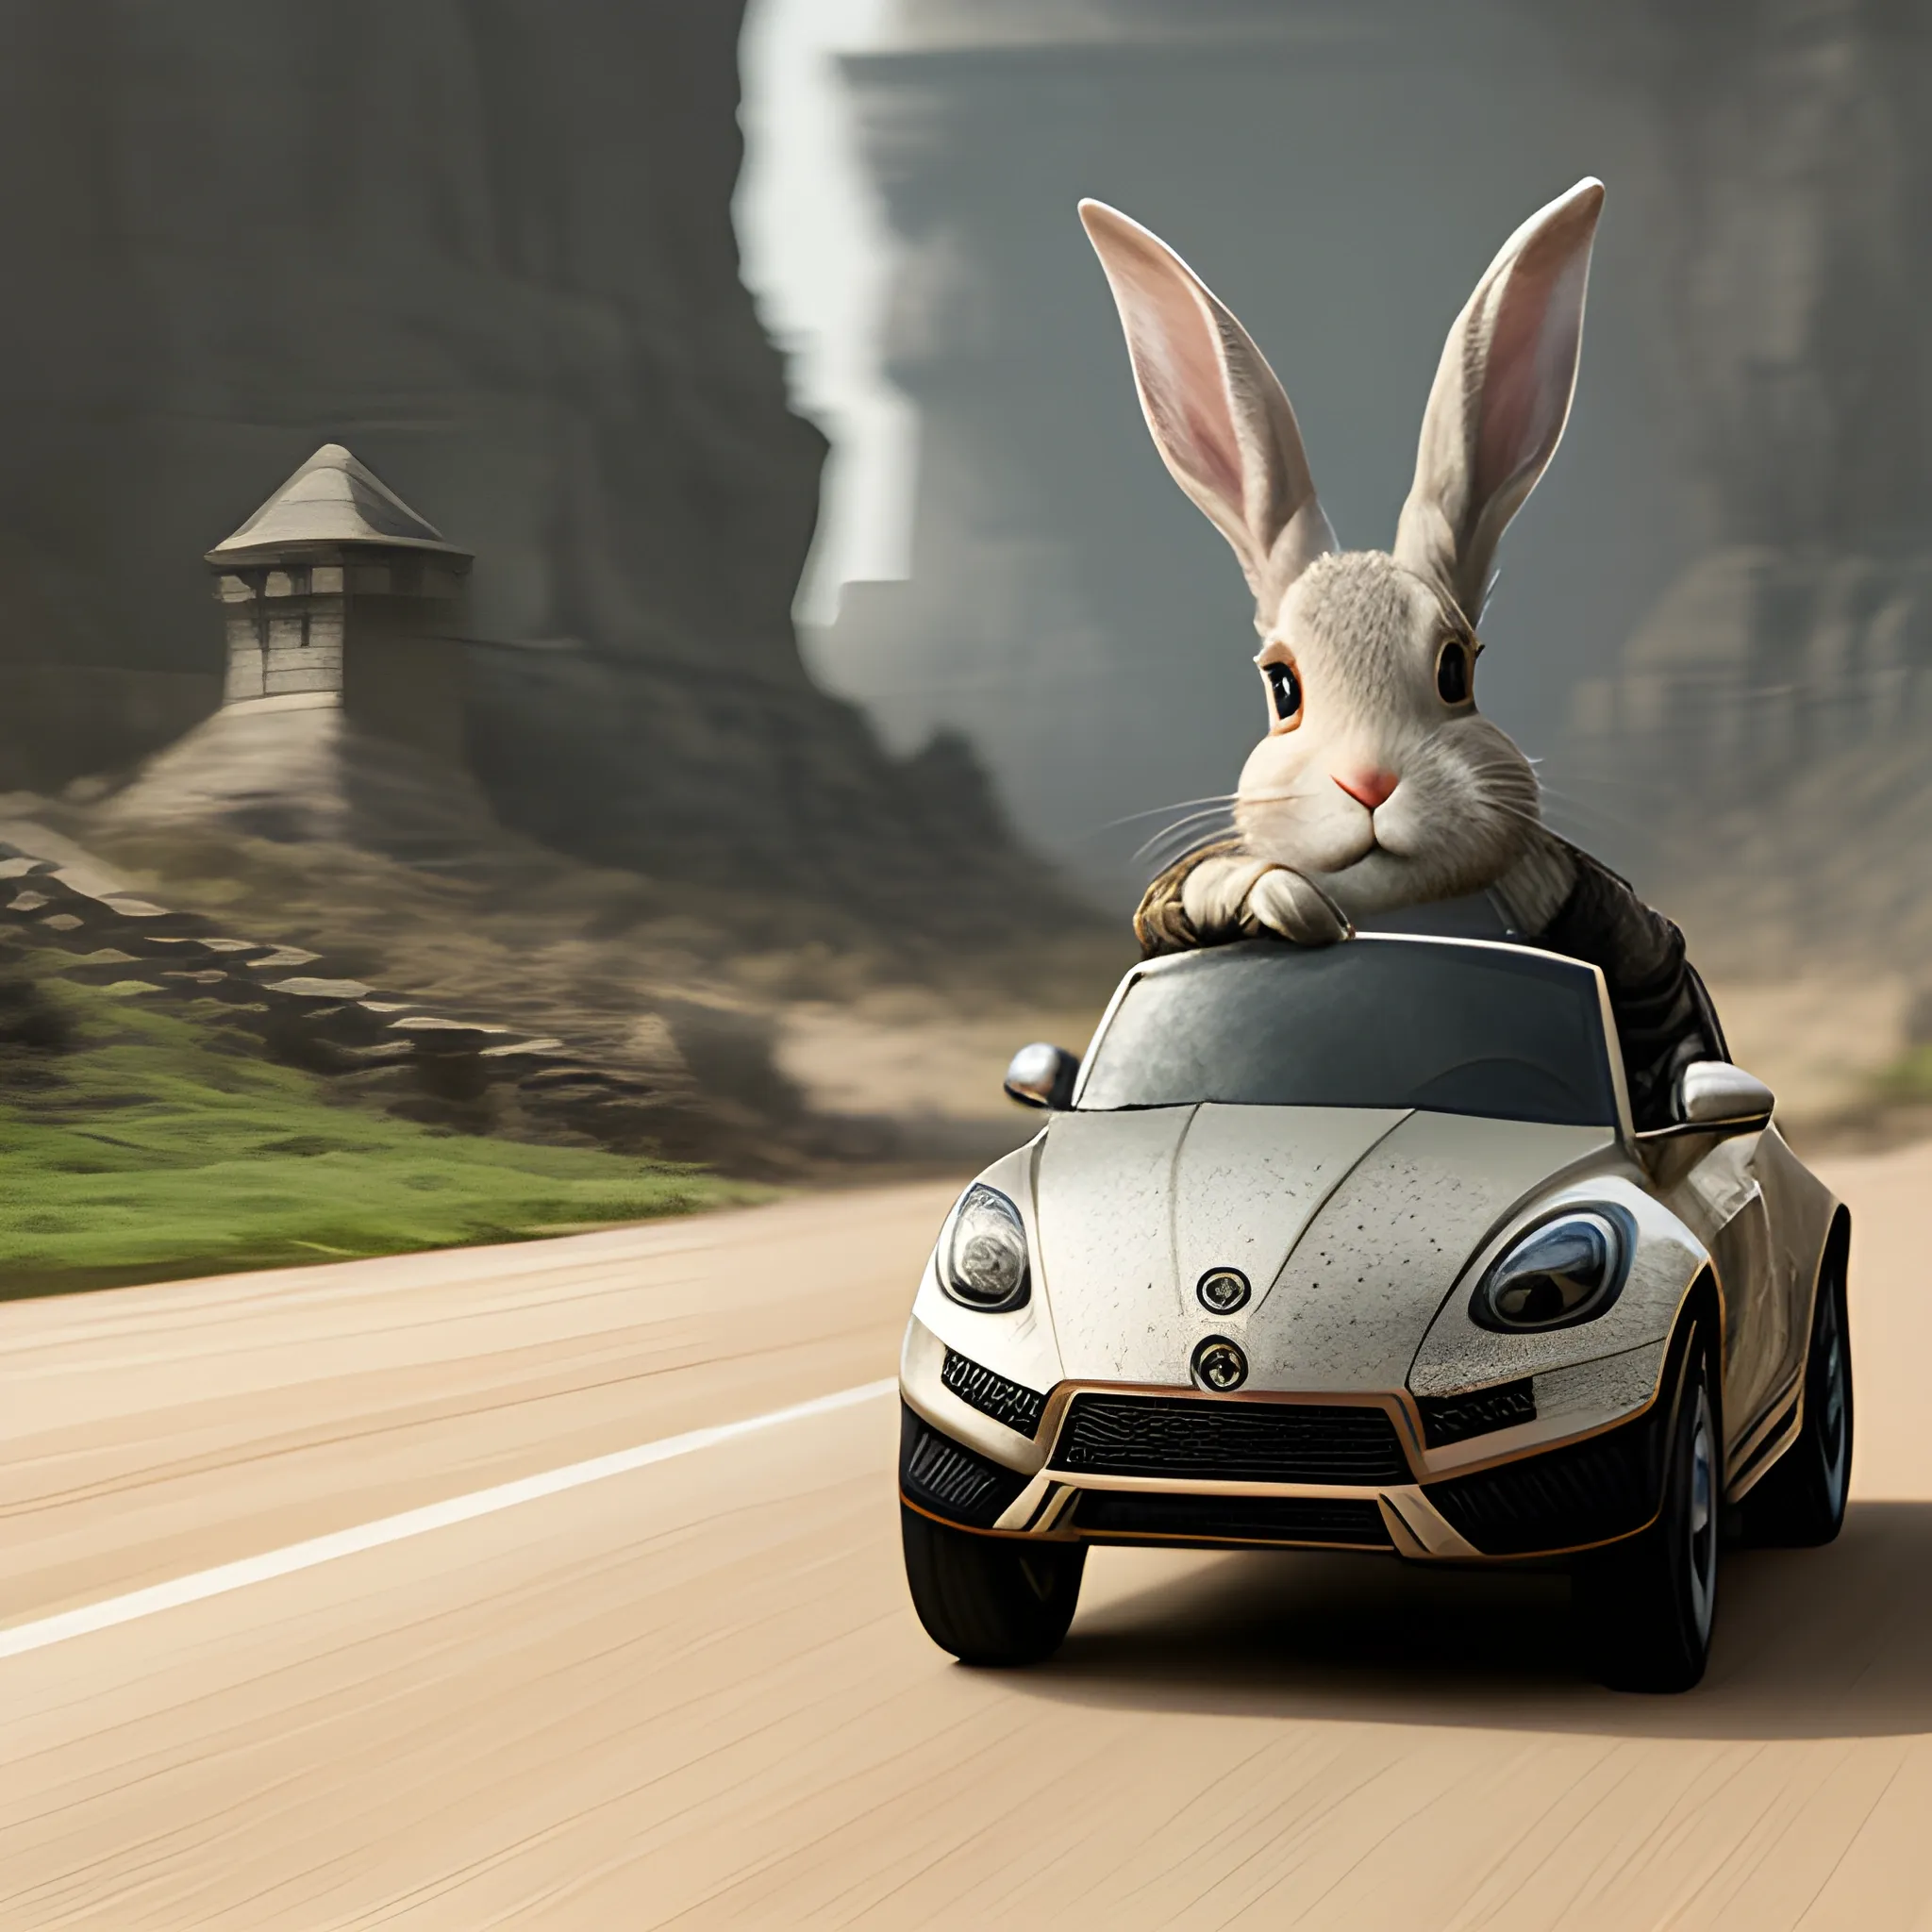 human-like rabbit driving a car, game of thrones, 4k, realistic, hd